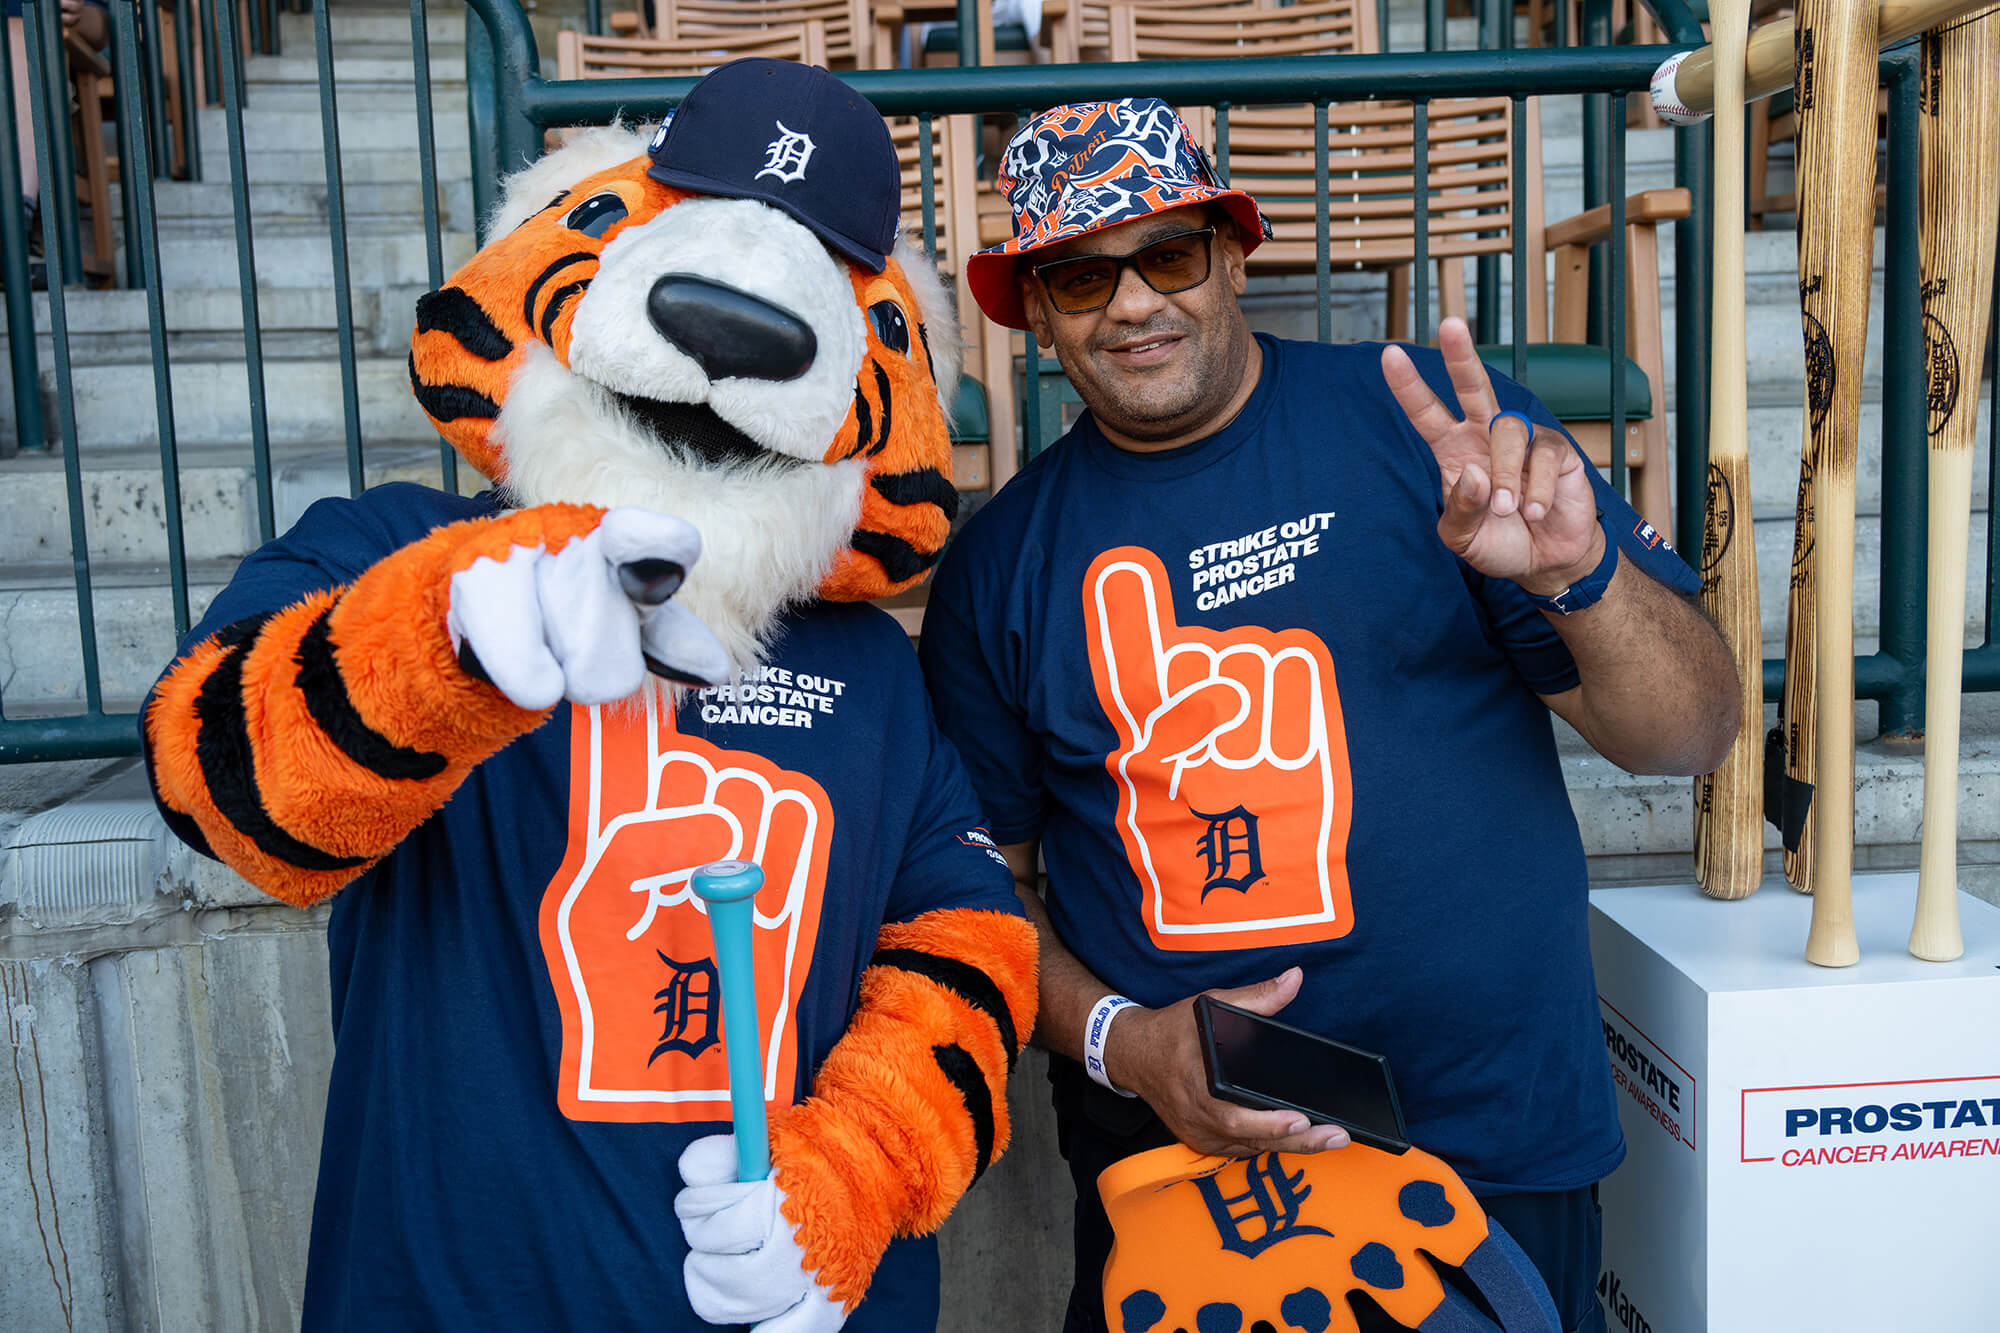 David Harris was recognized at the Prostate Cancer Awareness Night Game with the Detroit Tigers.